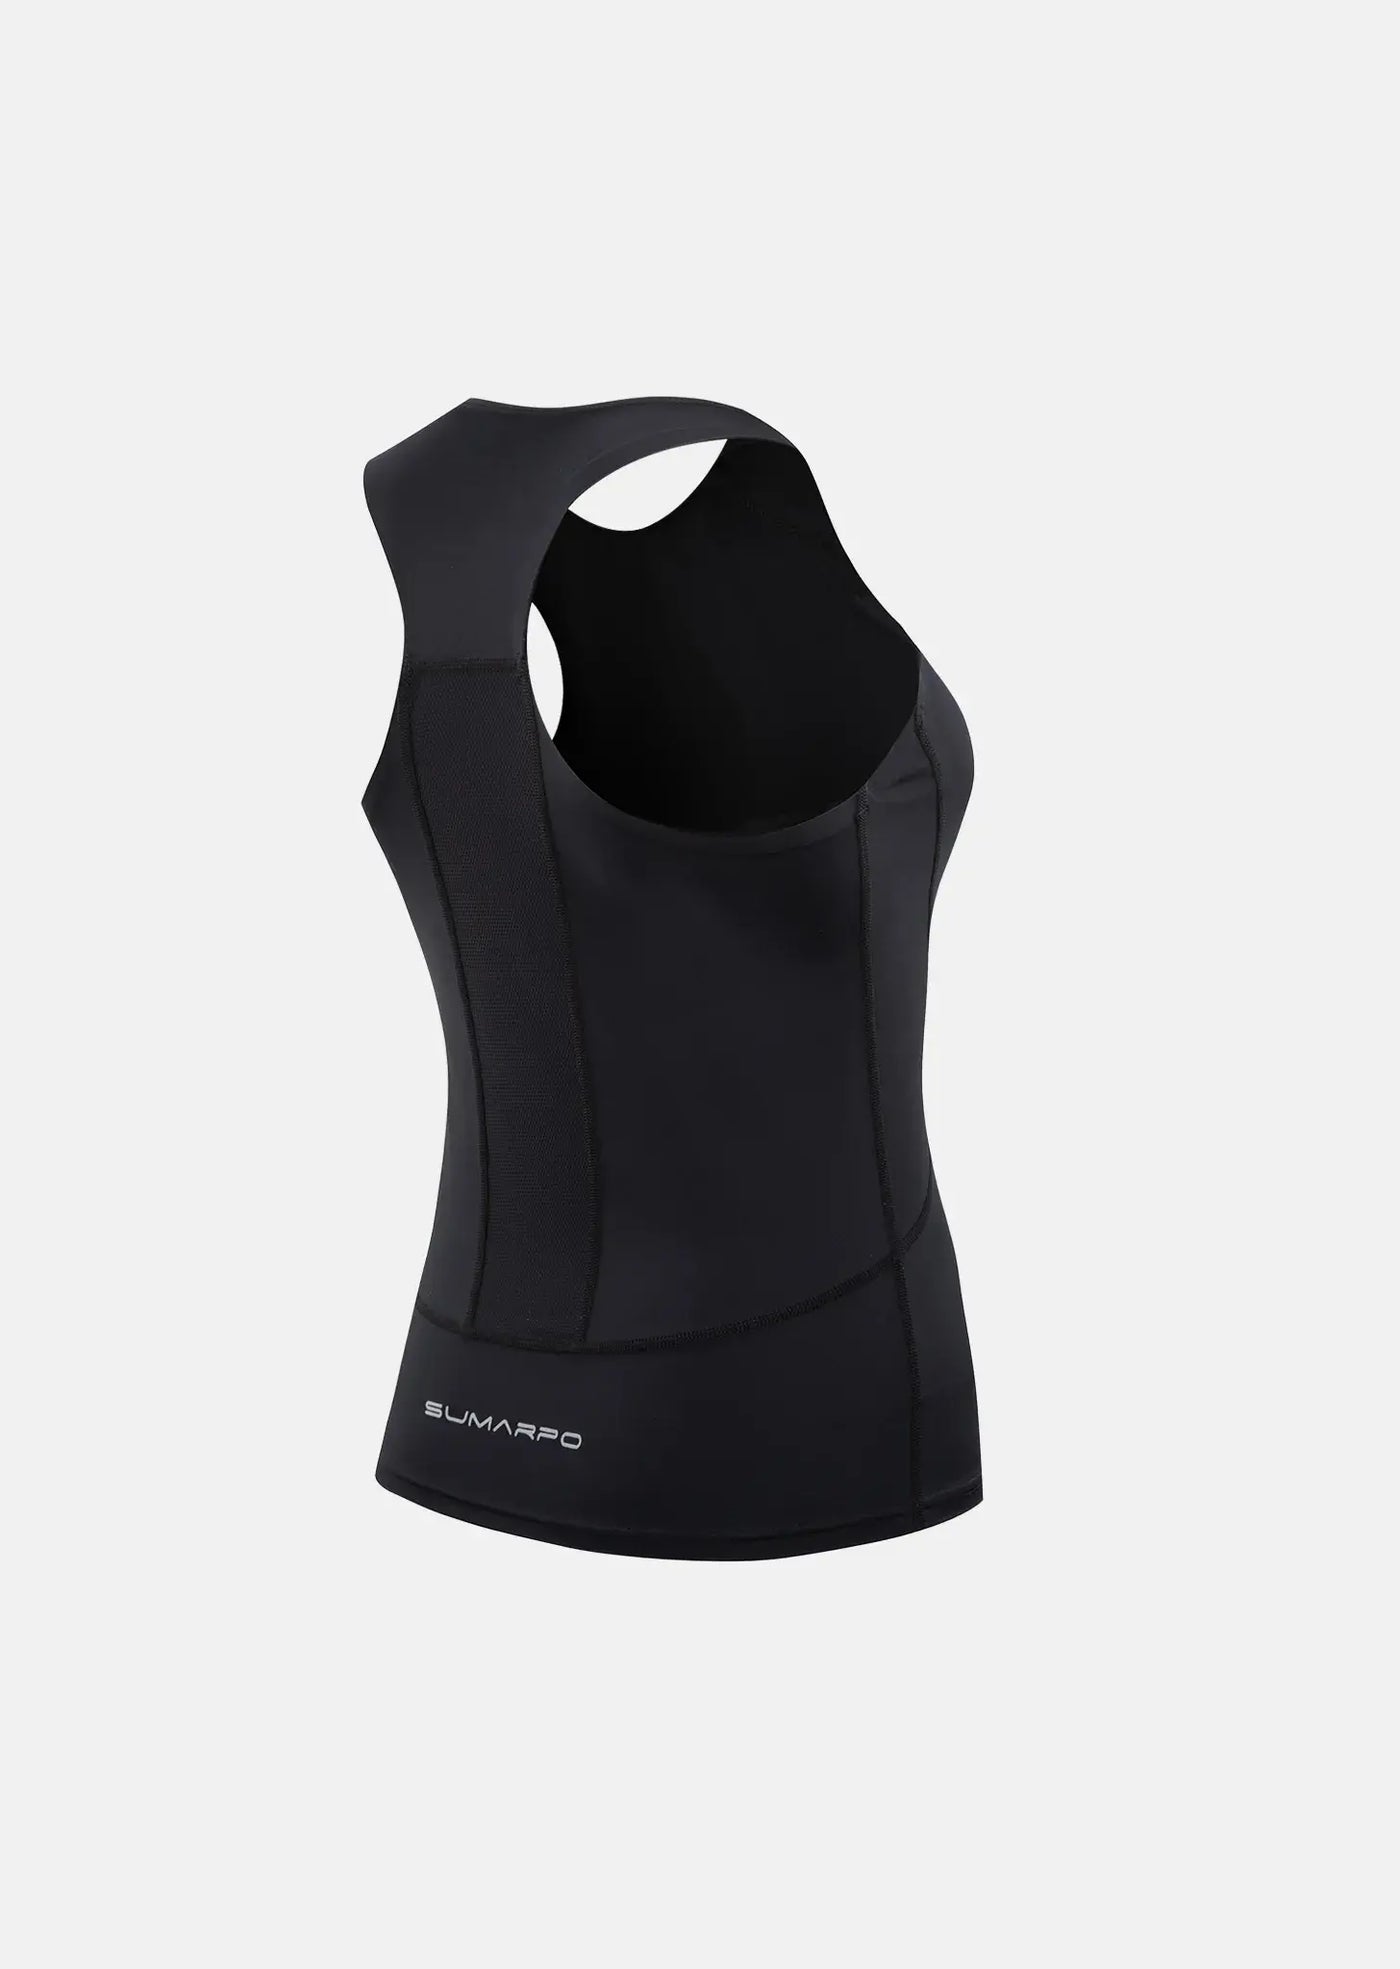 Women's Compression Top  Black & Quick Dry & Workout Shirts - SUMARPO